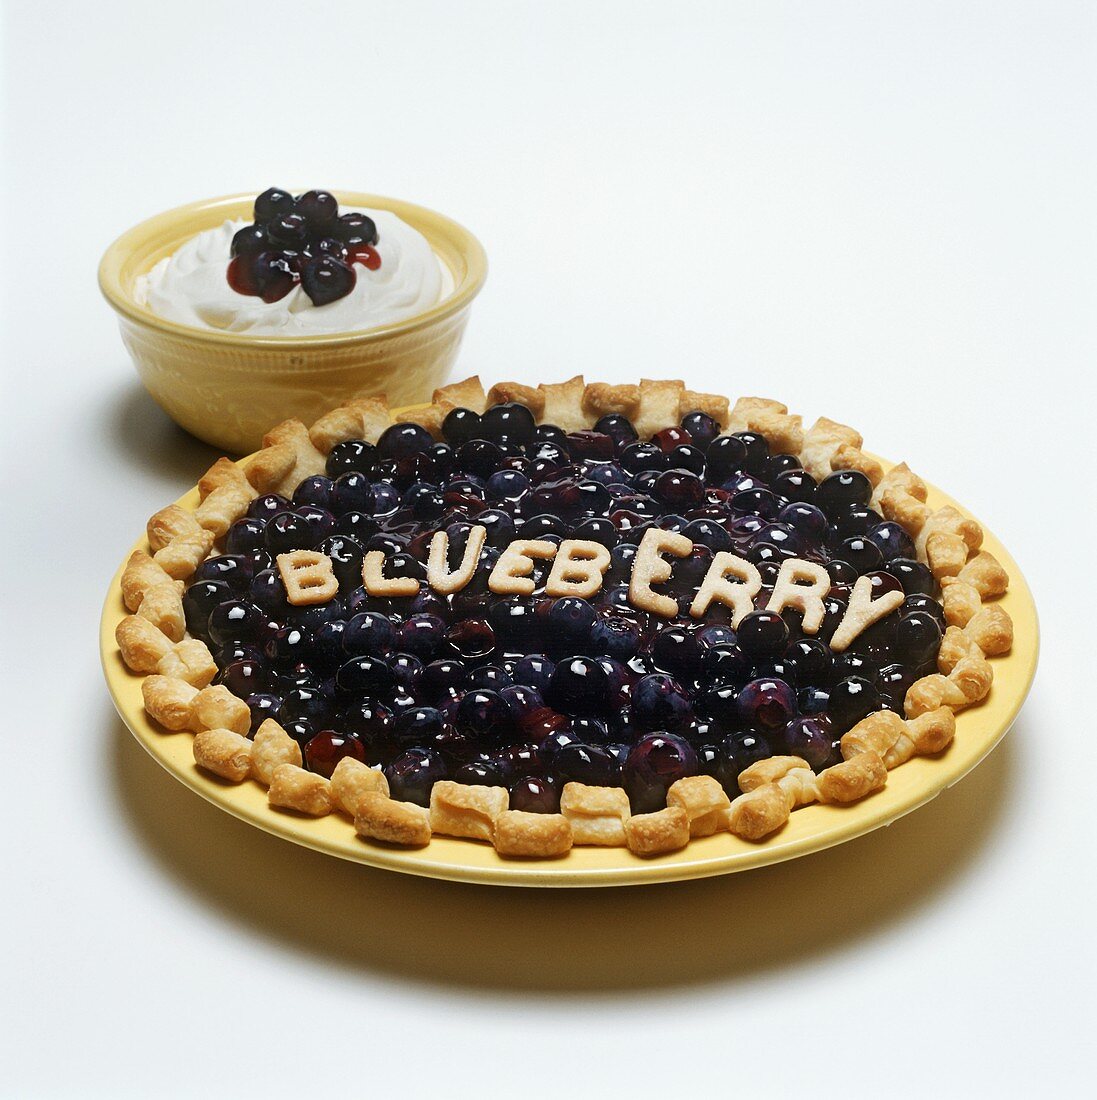 Blueberry Pie with a Bowl of Cream